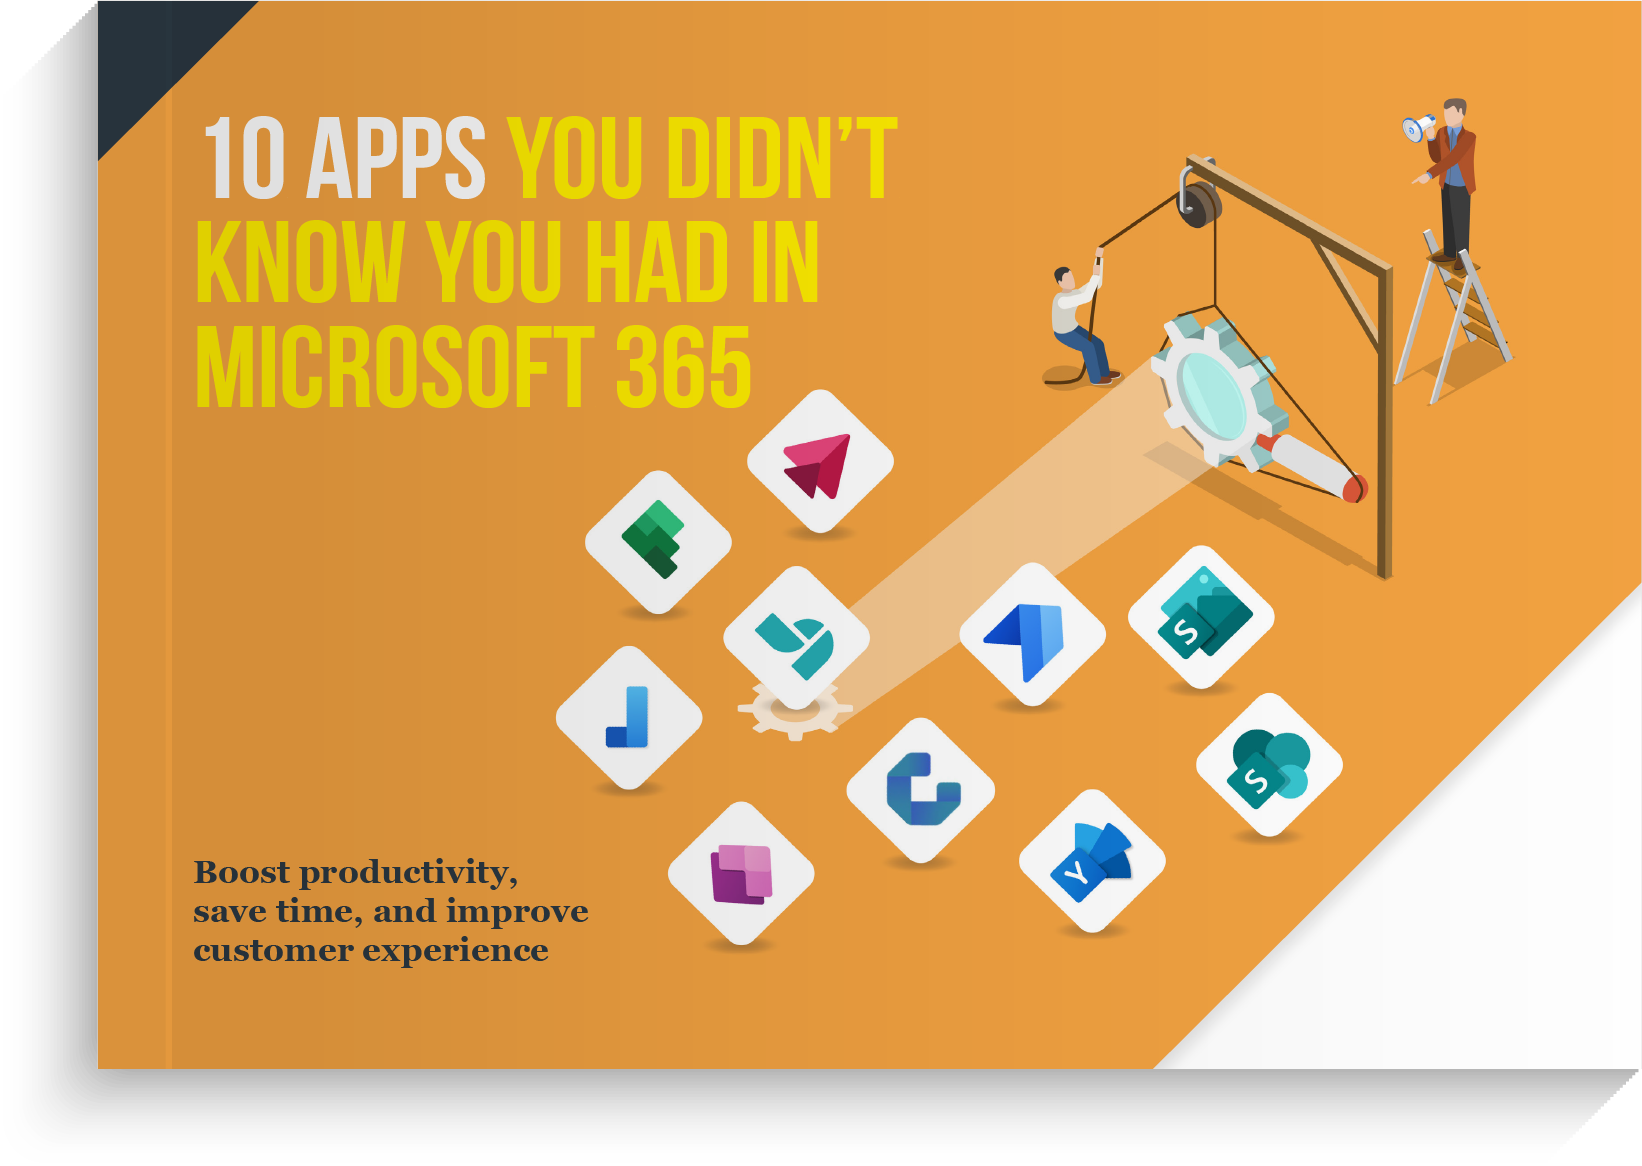 10 Apps You Didn't Know You Had in Microsoft 365